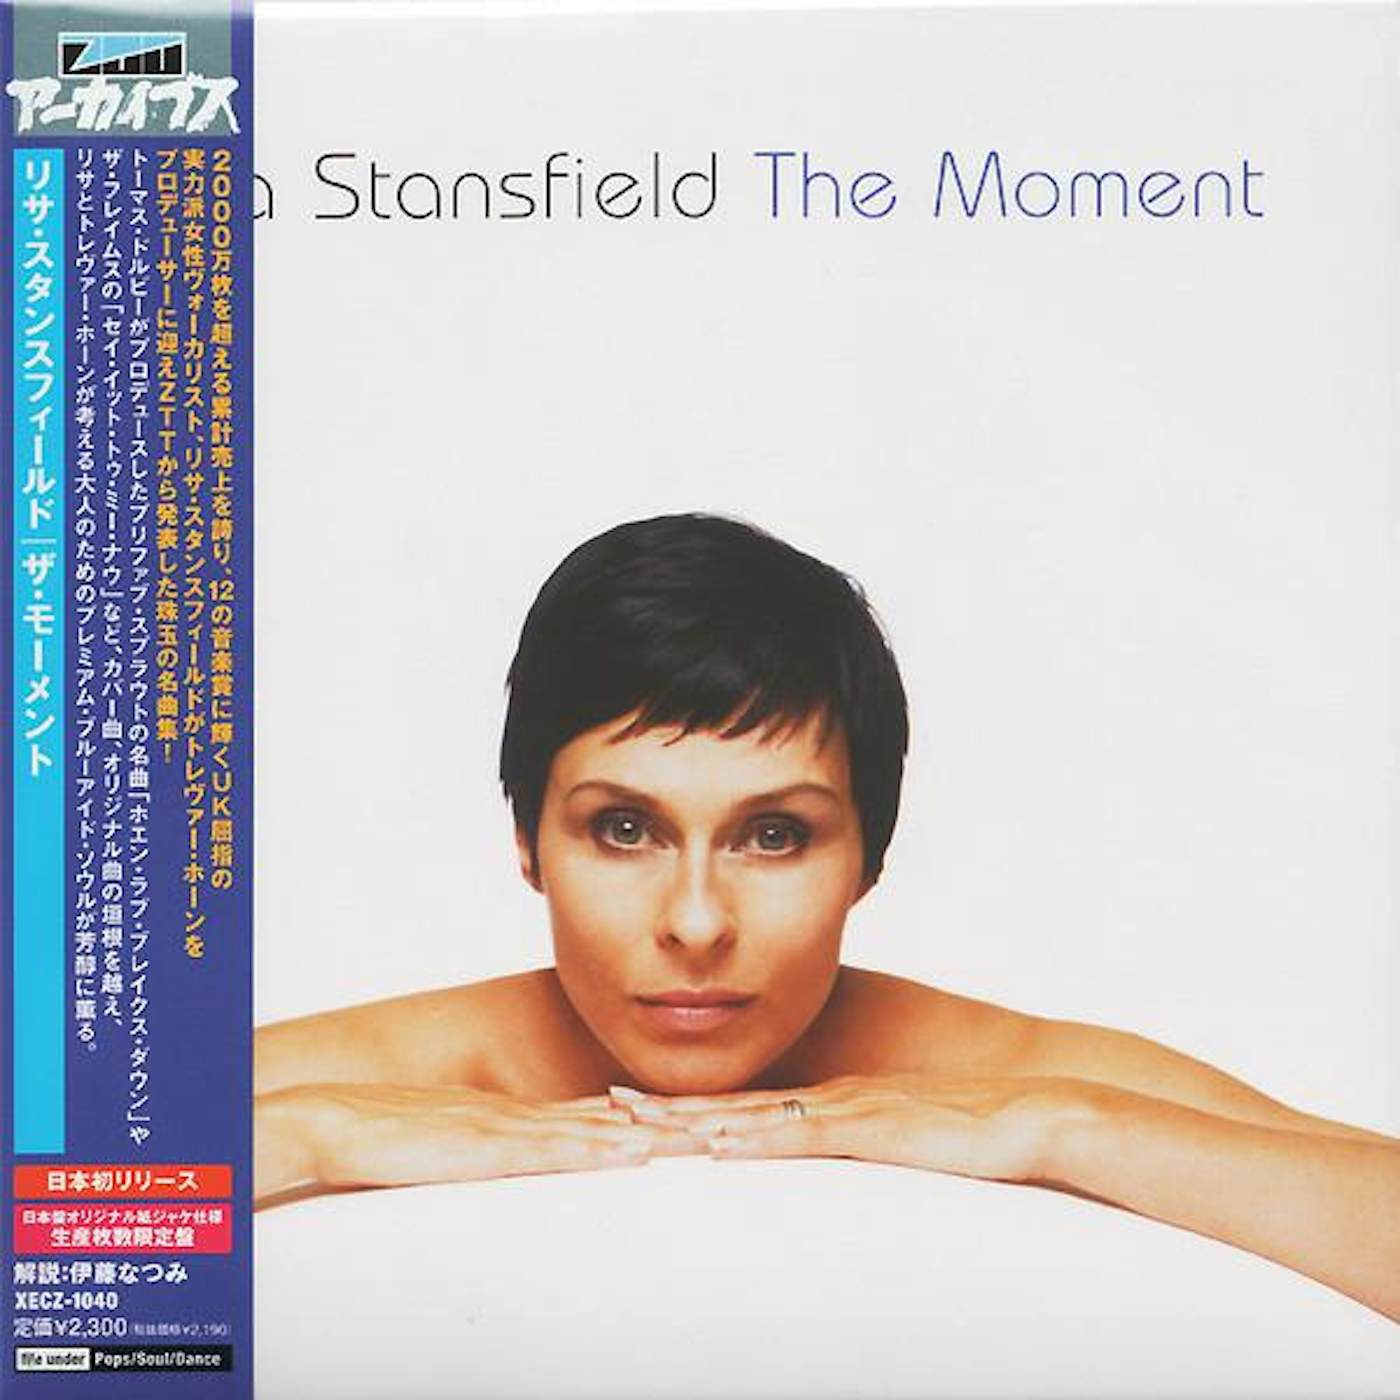 Lisa Stansfield MOMENT CD